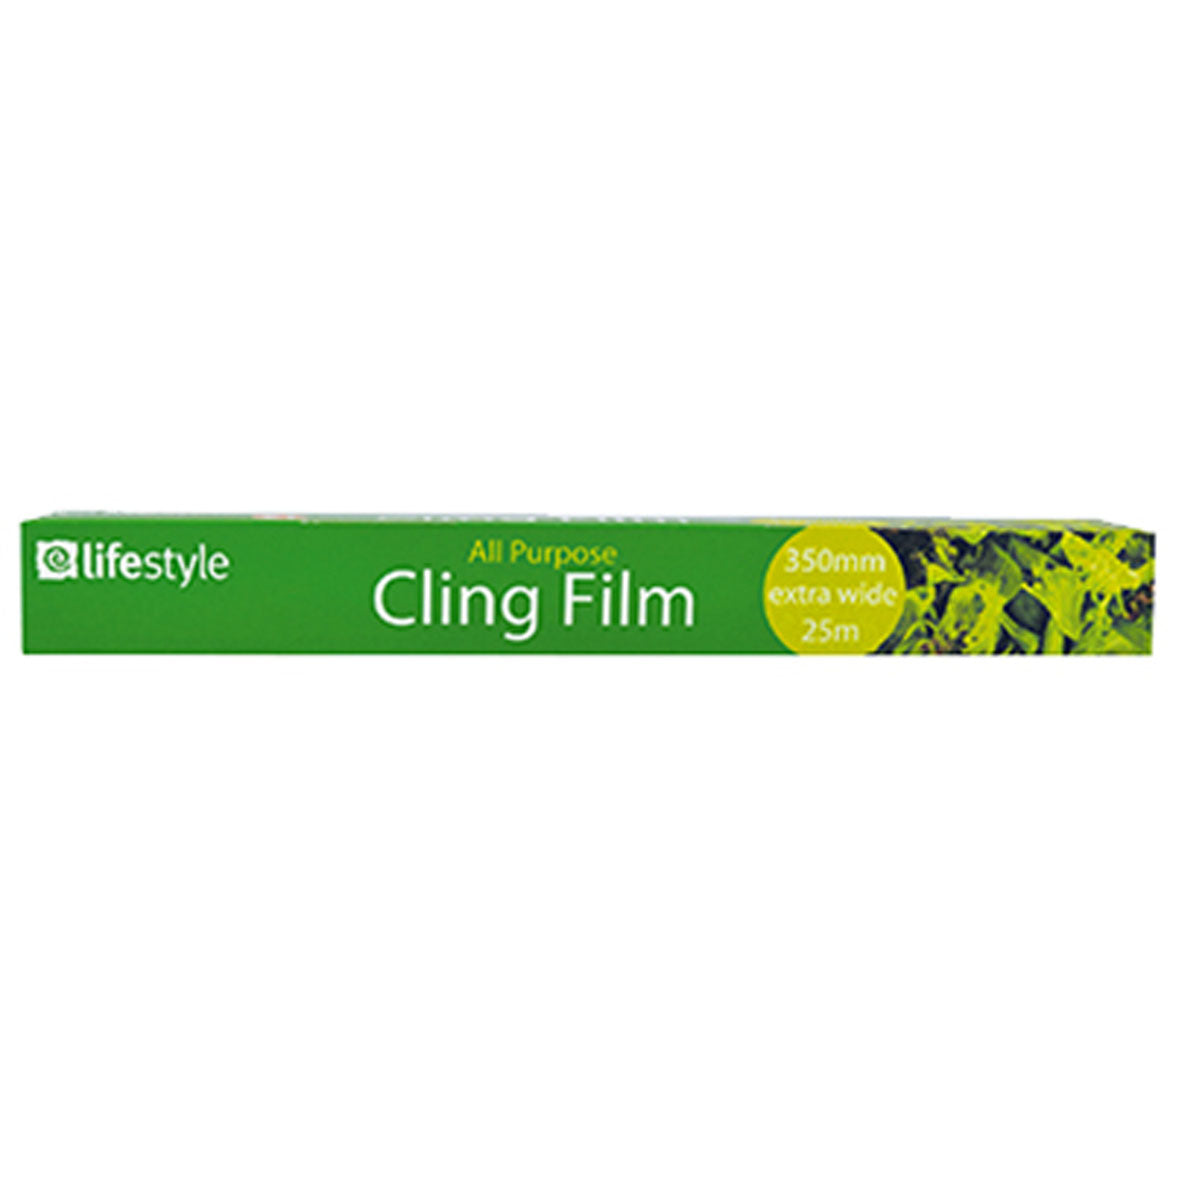 A package of Lifestyle - Cling Film - 350mm x 20m on a white background.